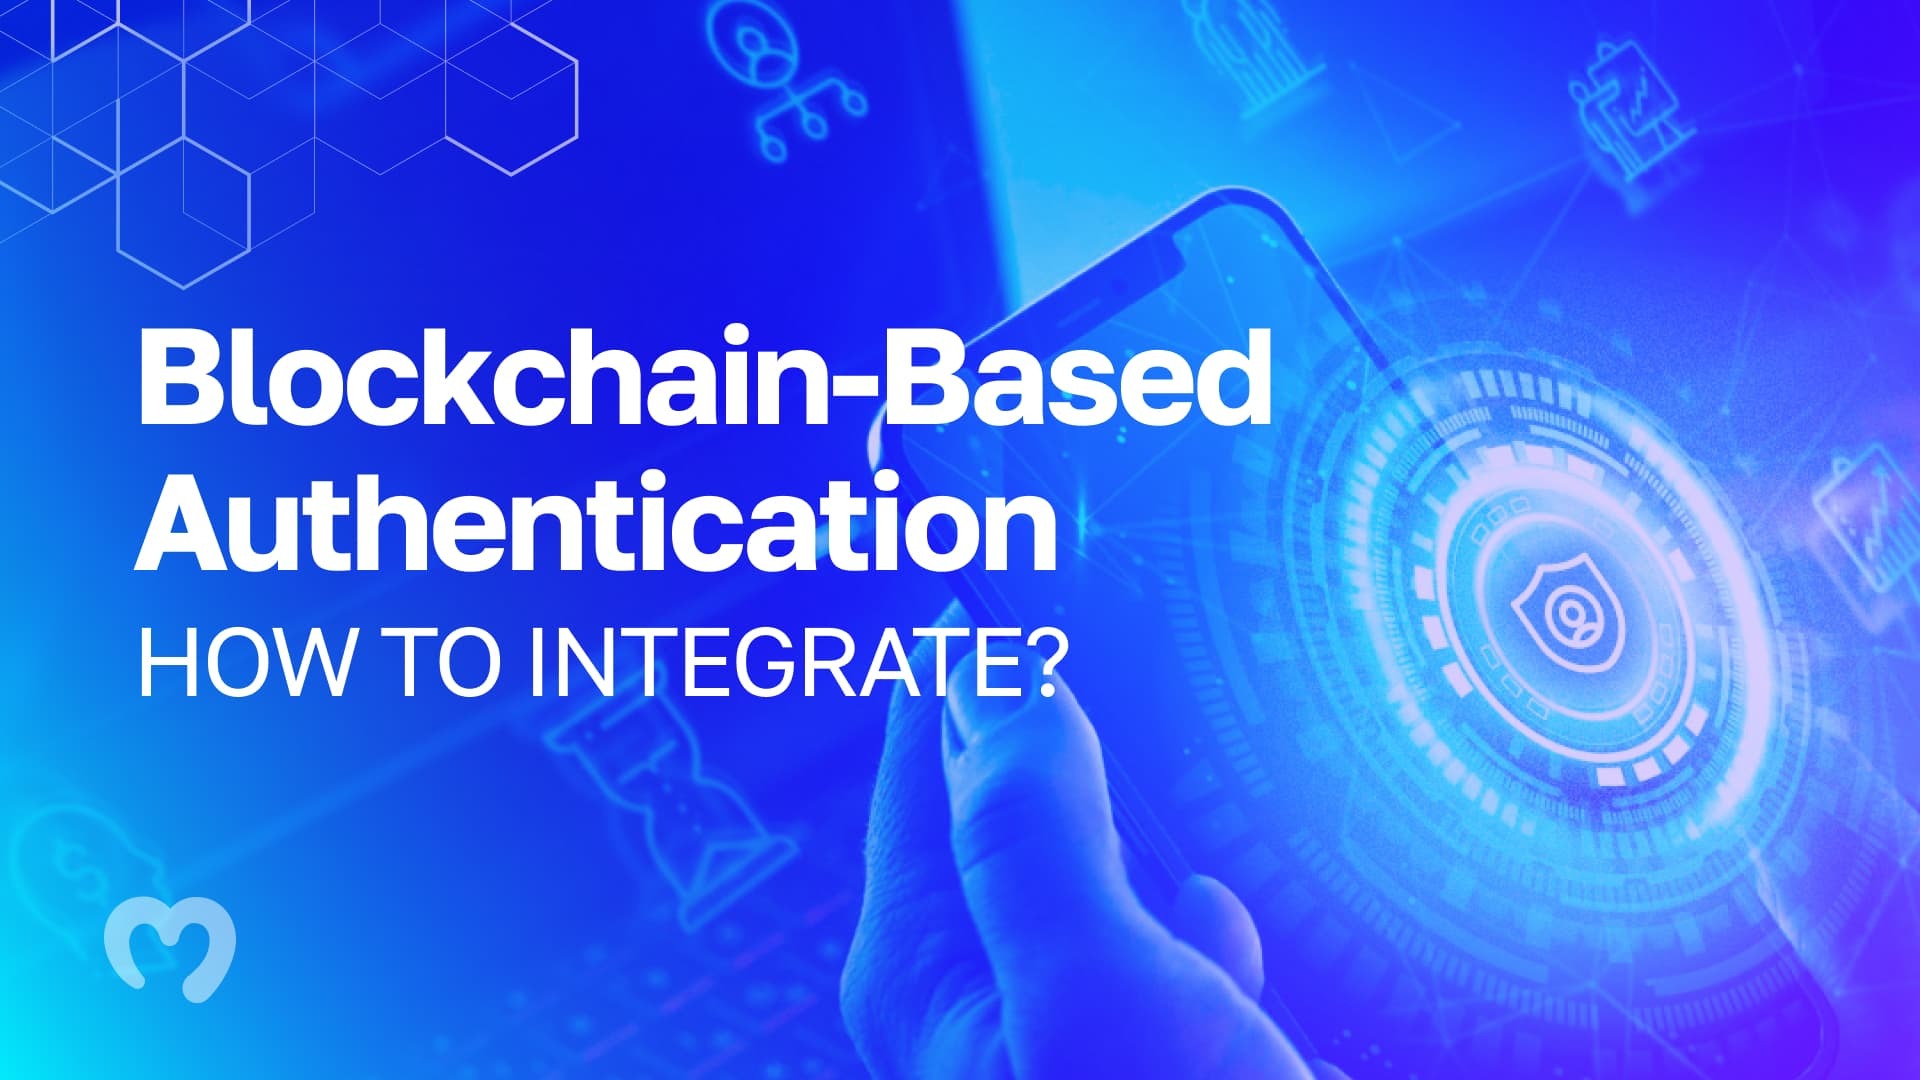 User verifying his identity using a blockchain-based authentication solution.